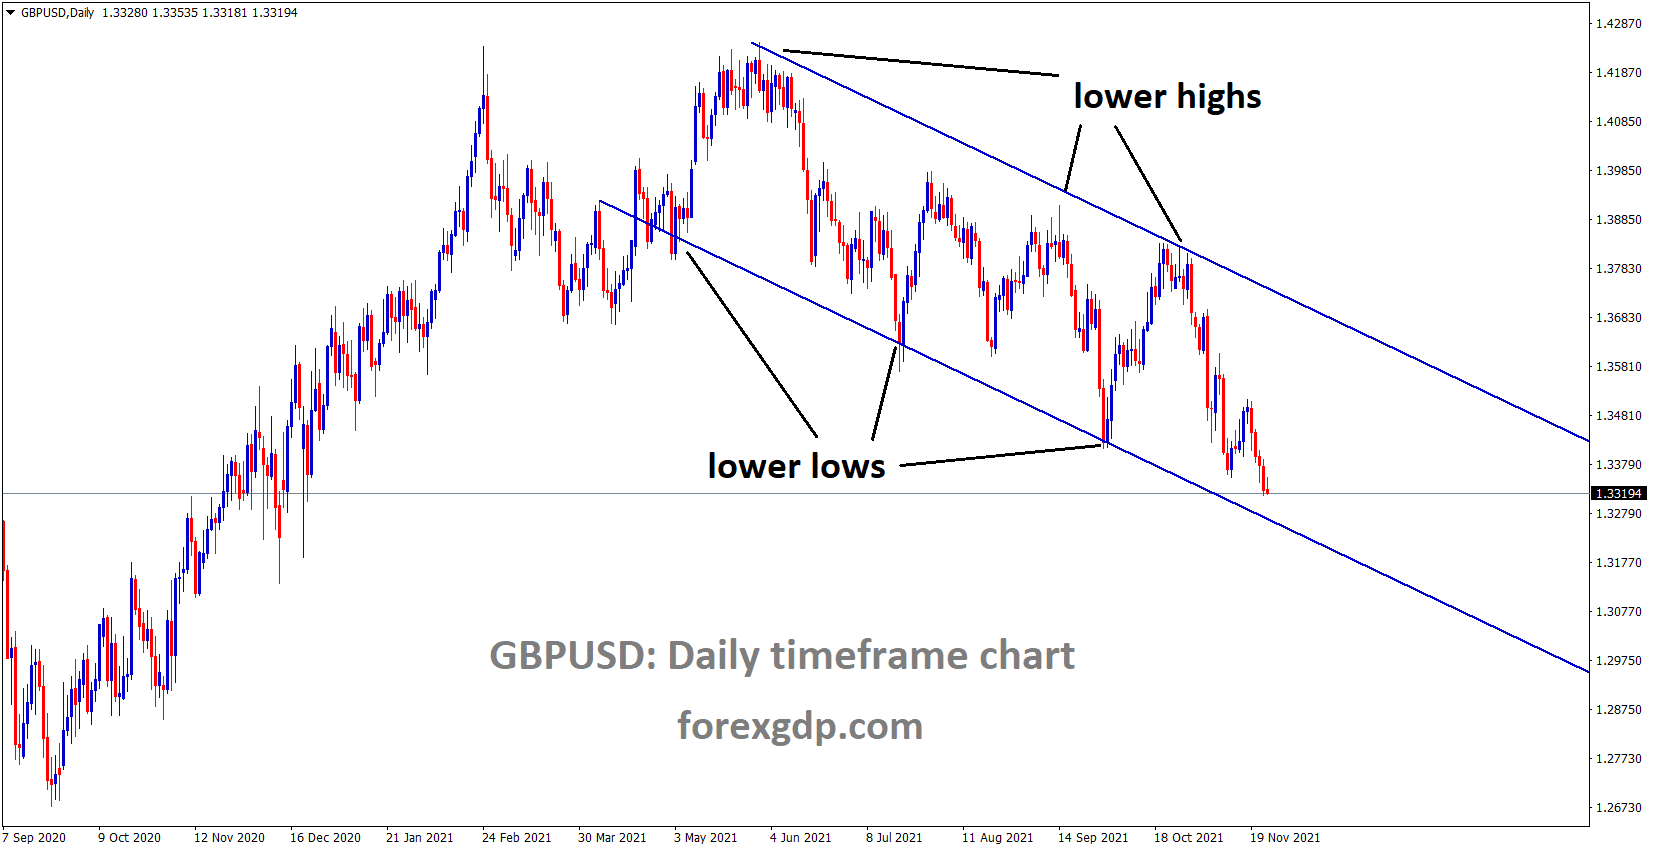 GBPUSD is moving in the Descending channel and the market reached the lower low area of the channel